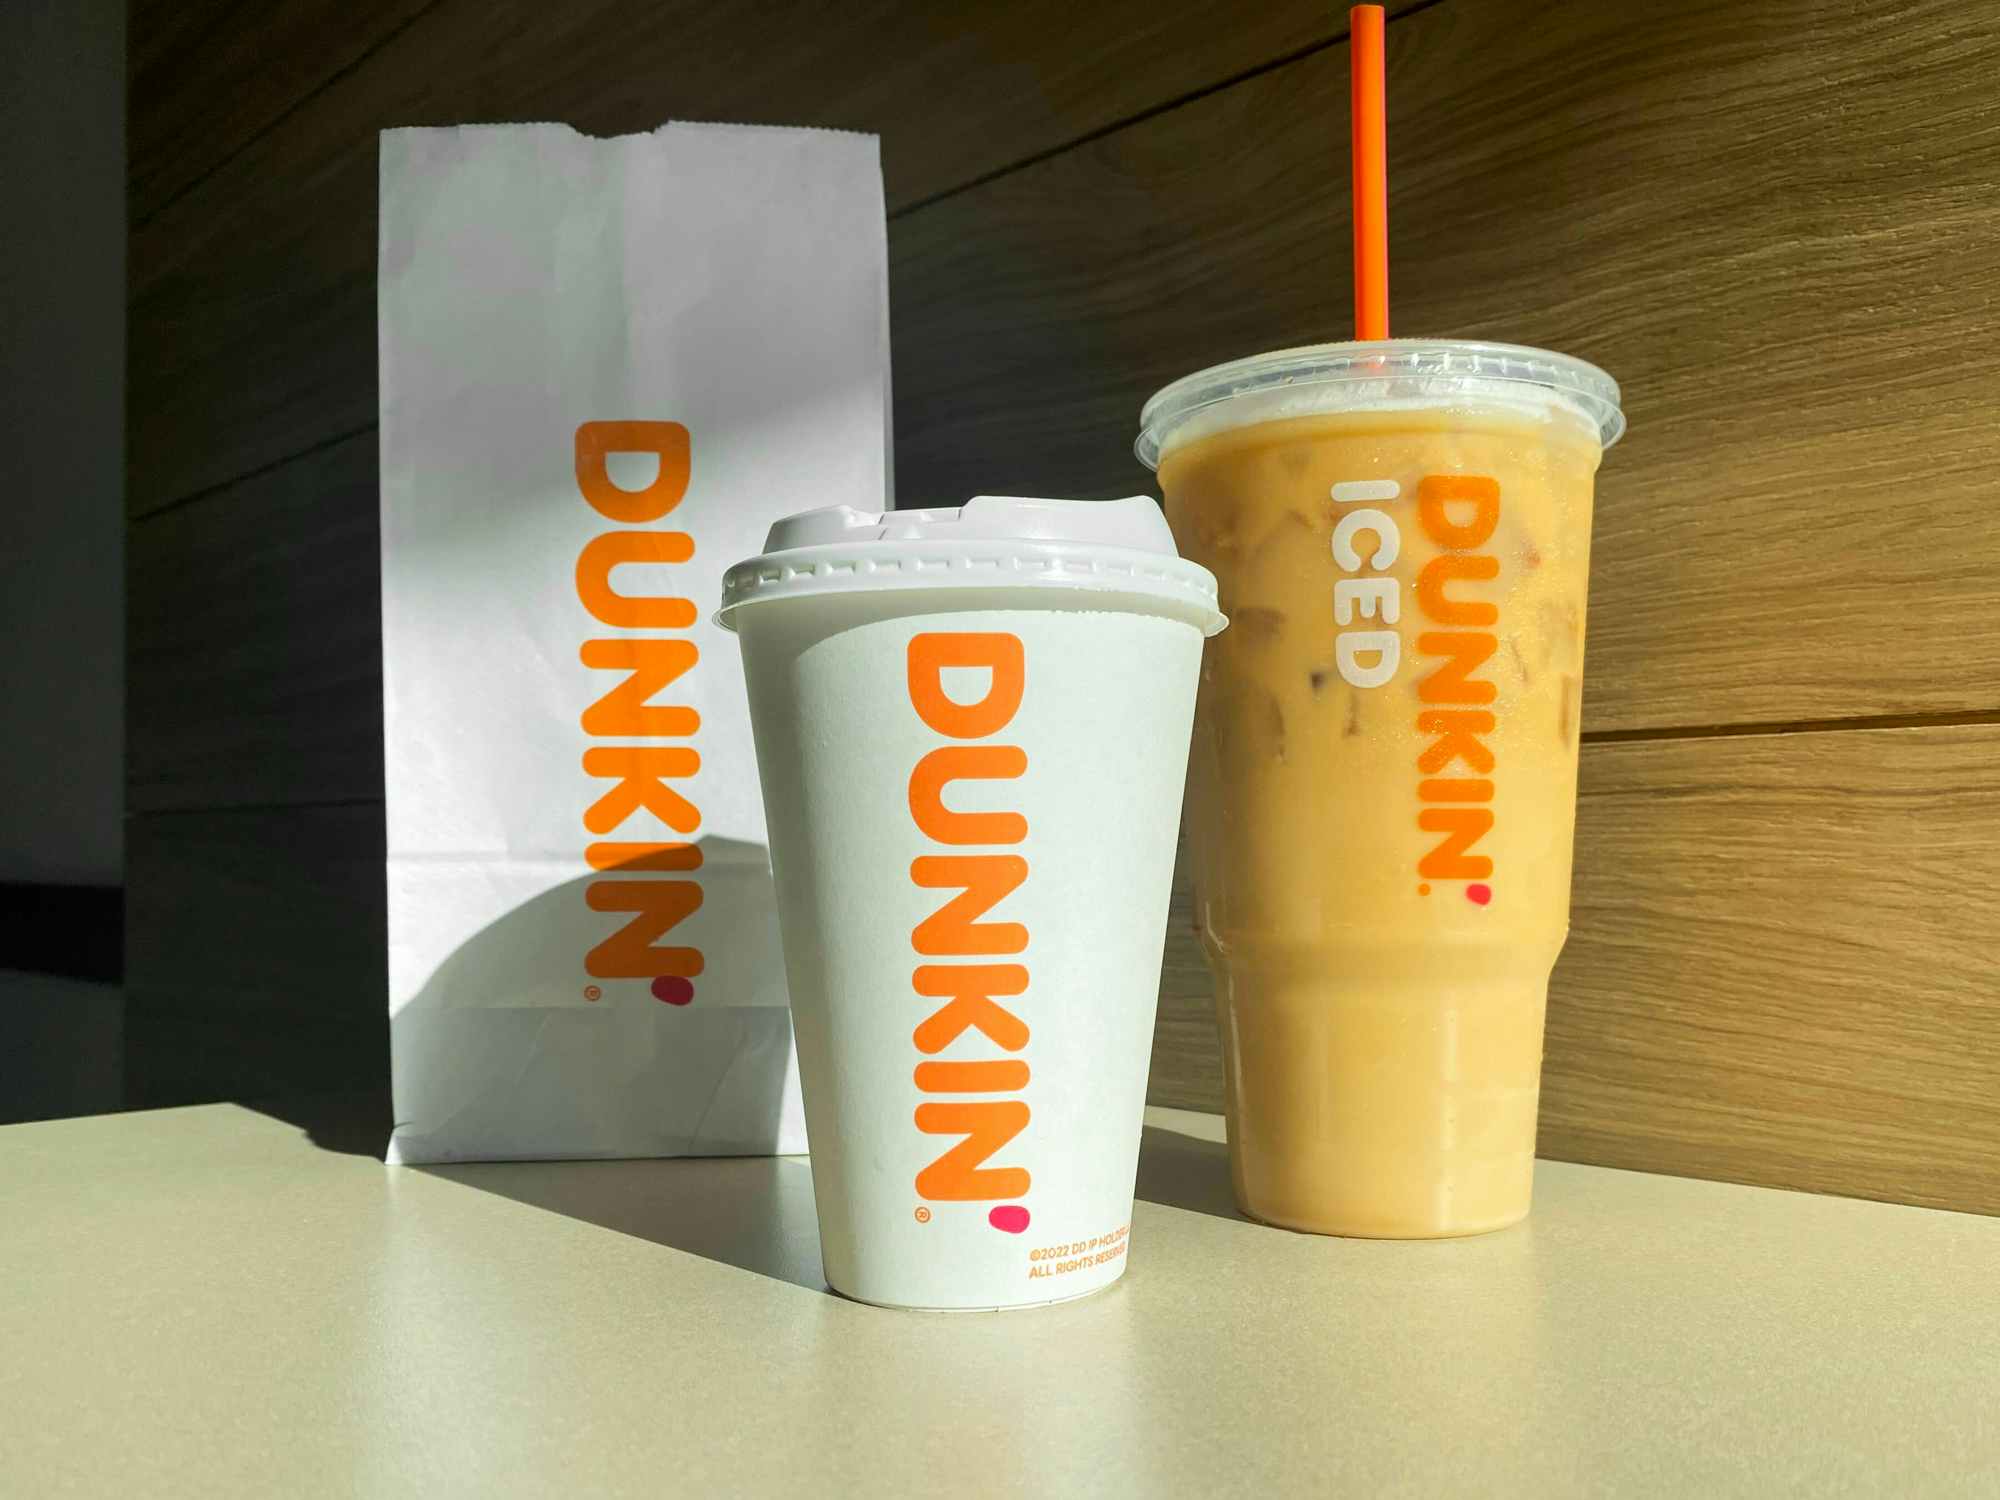 pumpkin spice drinks and a bag from Dunkin on a table